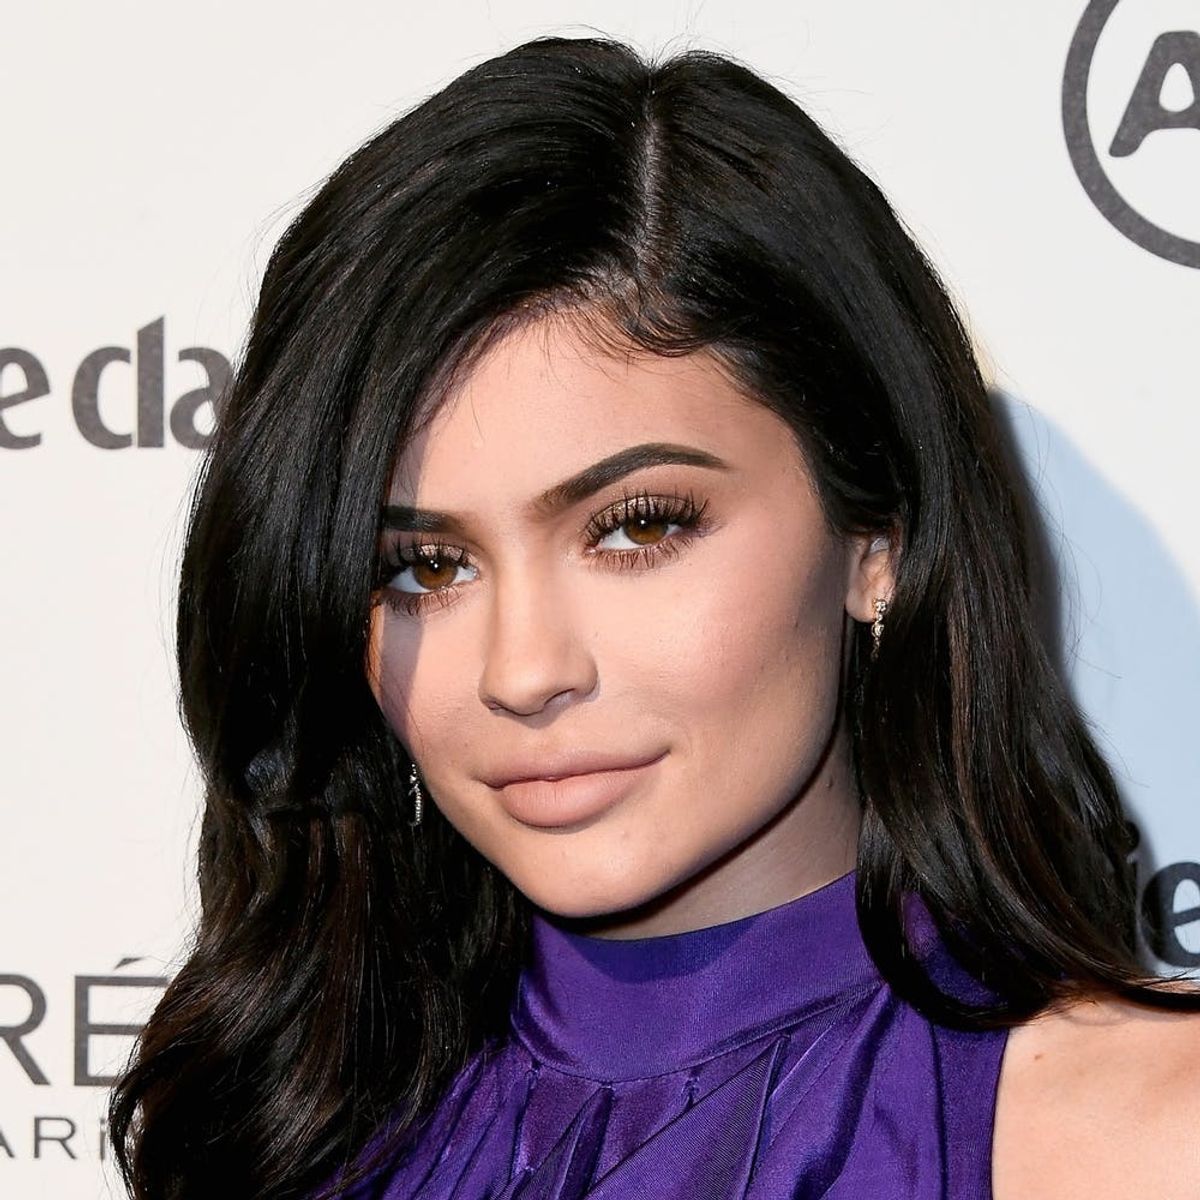 What Kylie Jenner’s Pregnancy Says to Her Young Fans